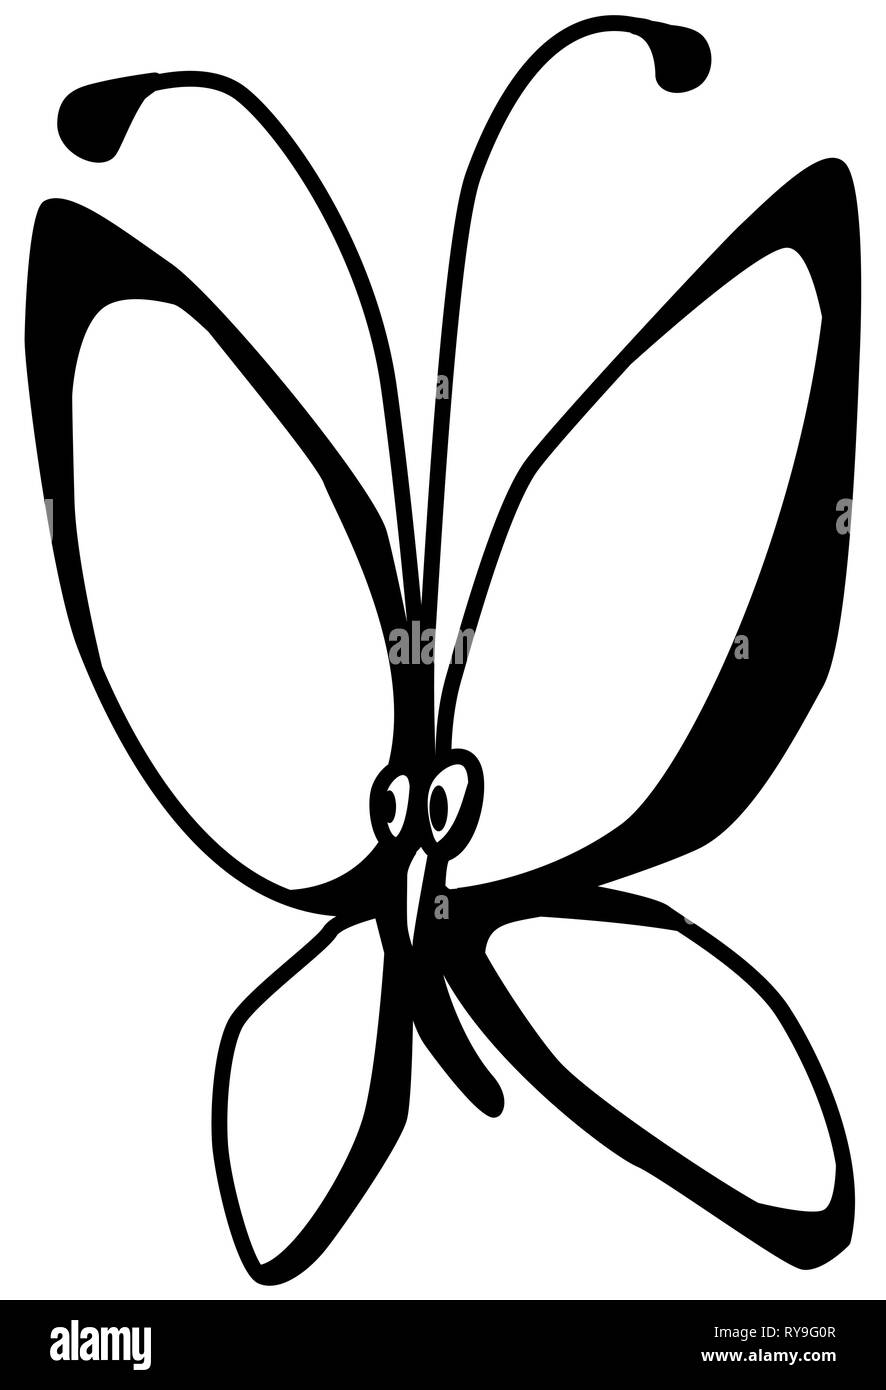 Butterfly cartoon Black and White Stock Photos & Images - Alamy